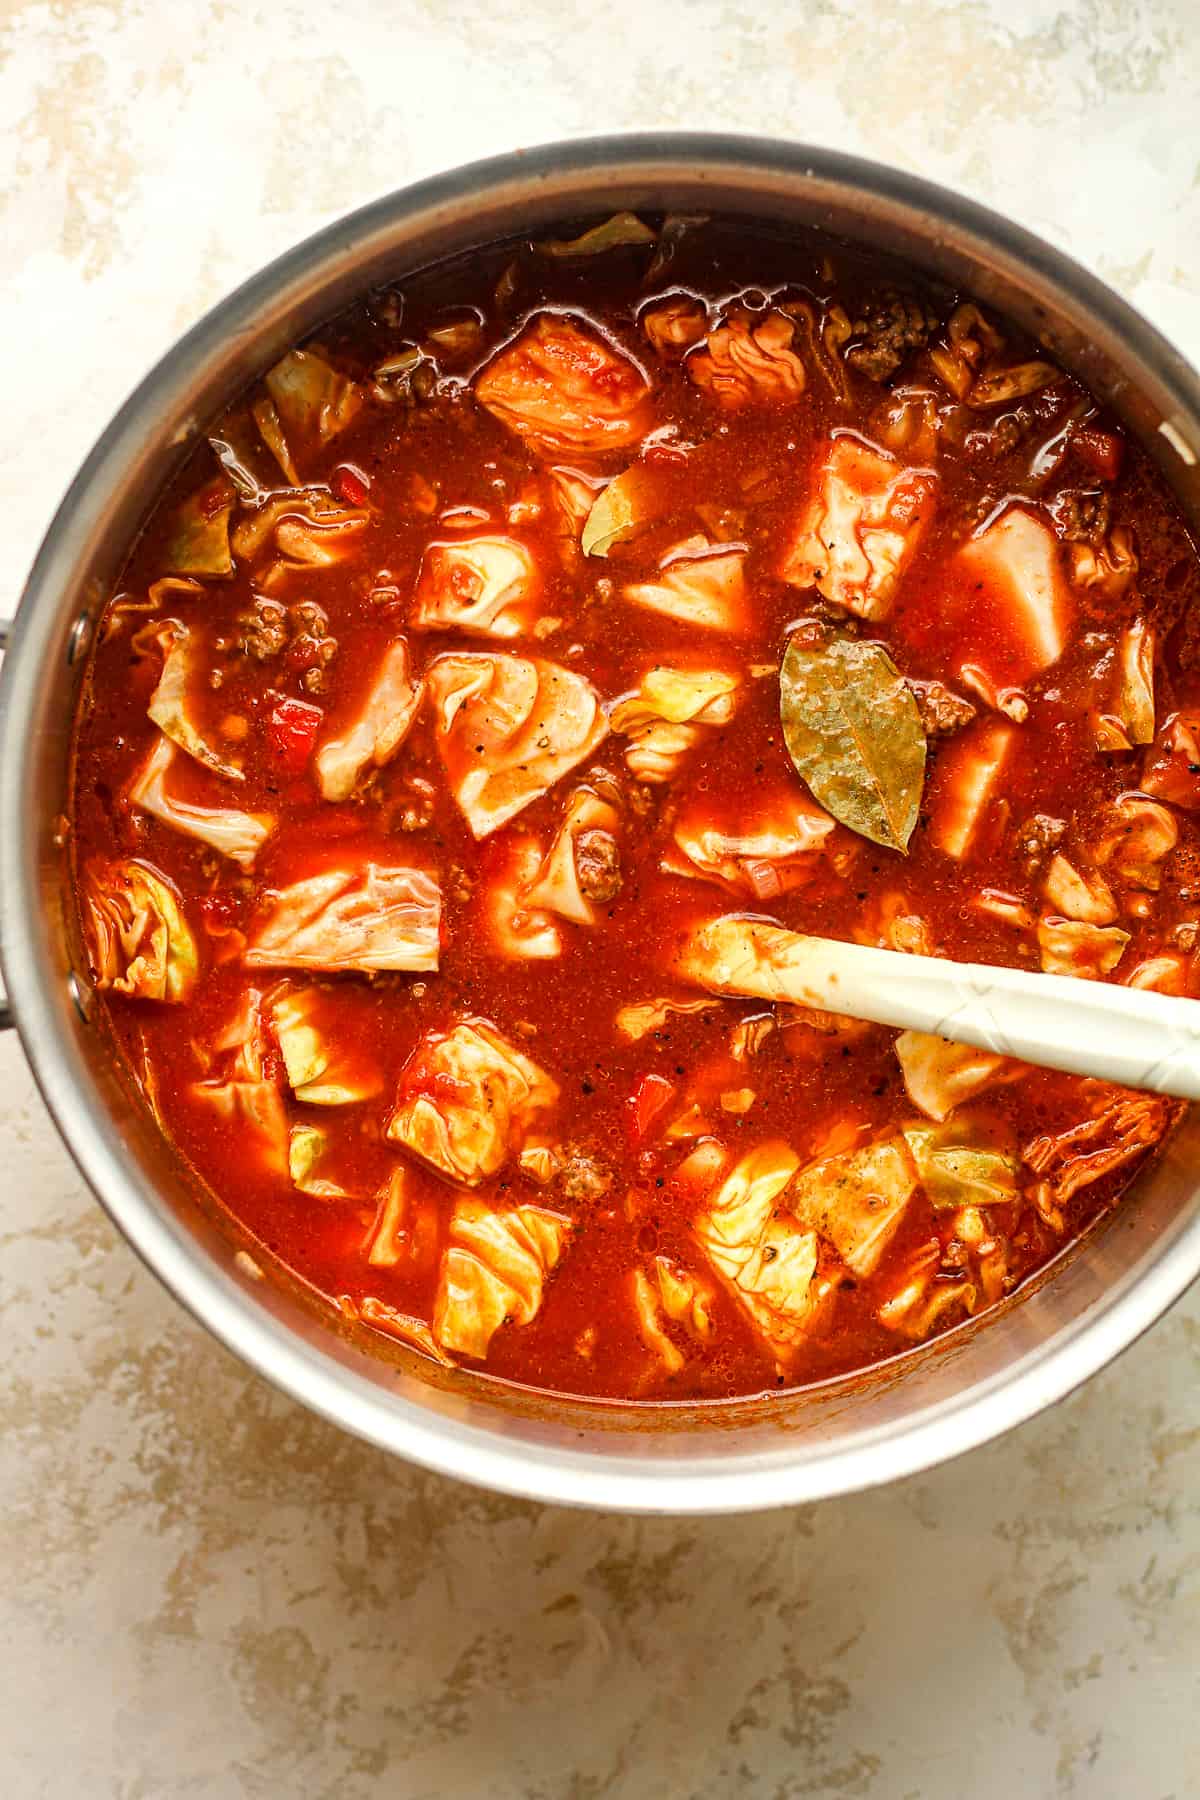 A large pot of stuffed cabbage soup before adding the rice.